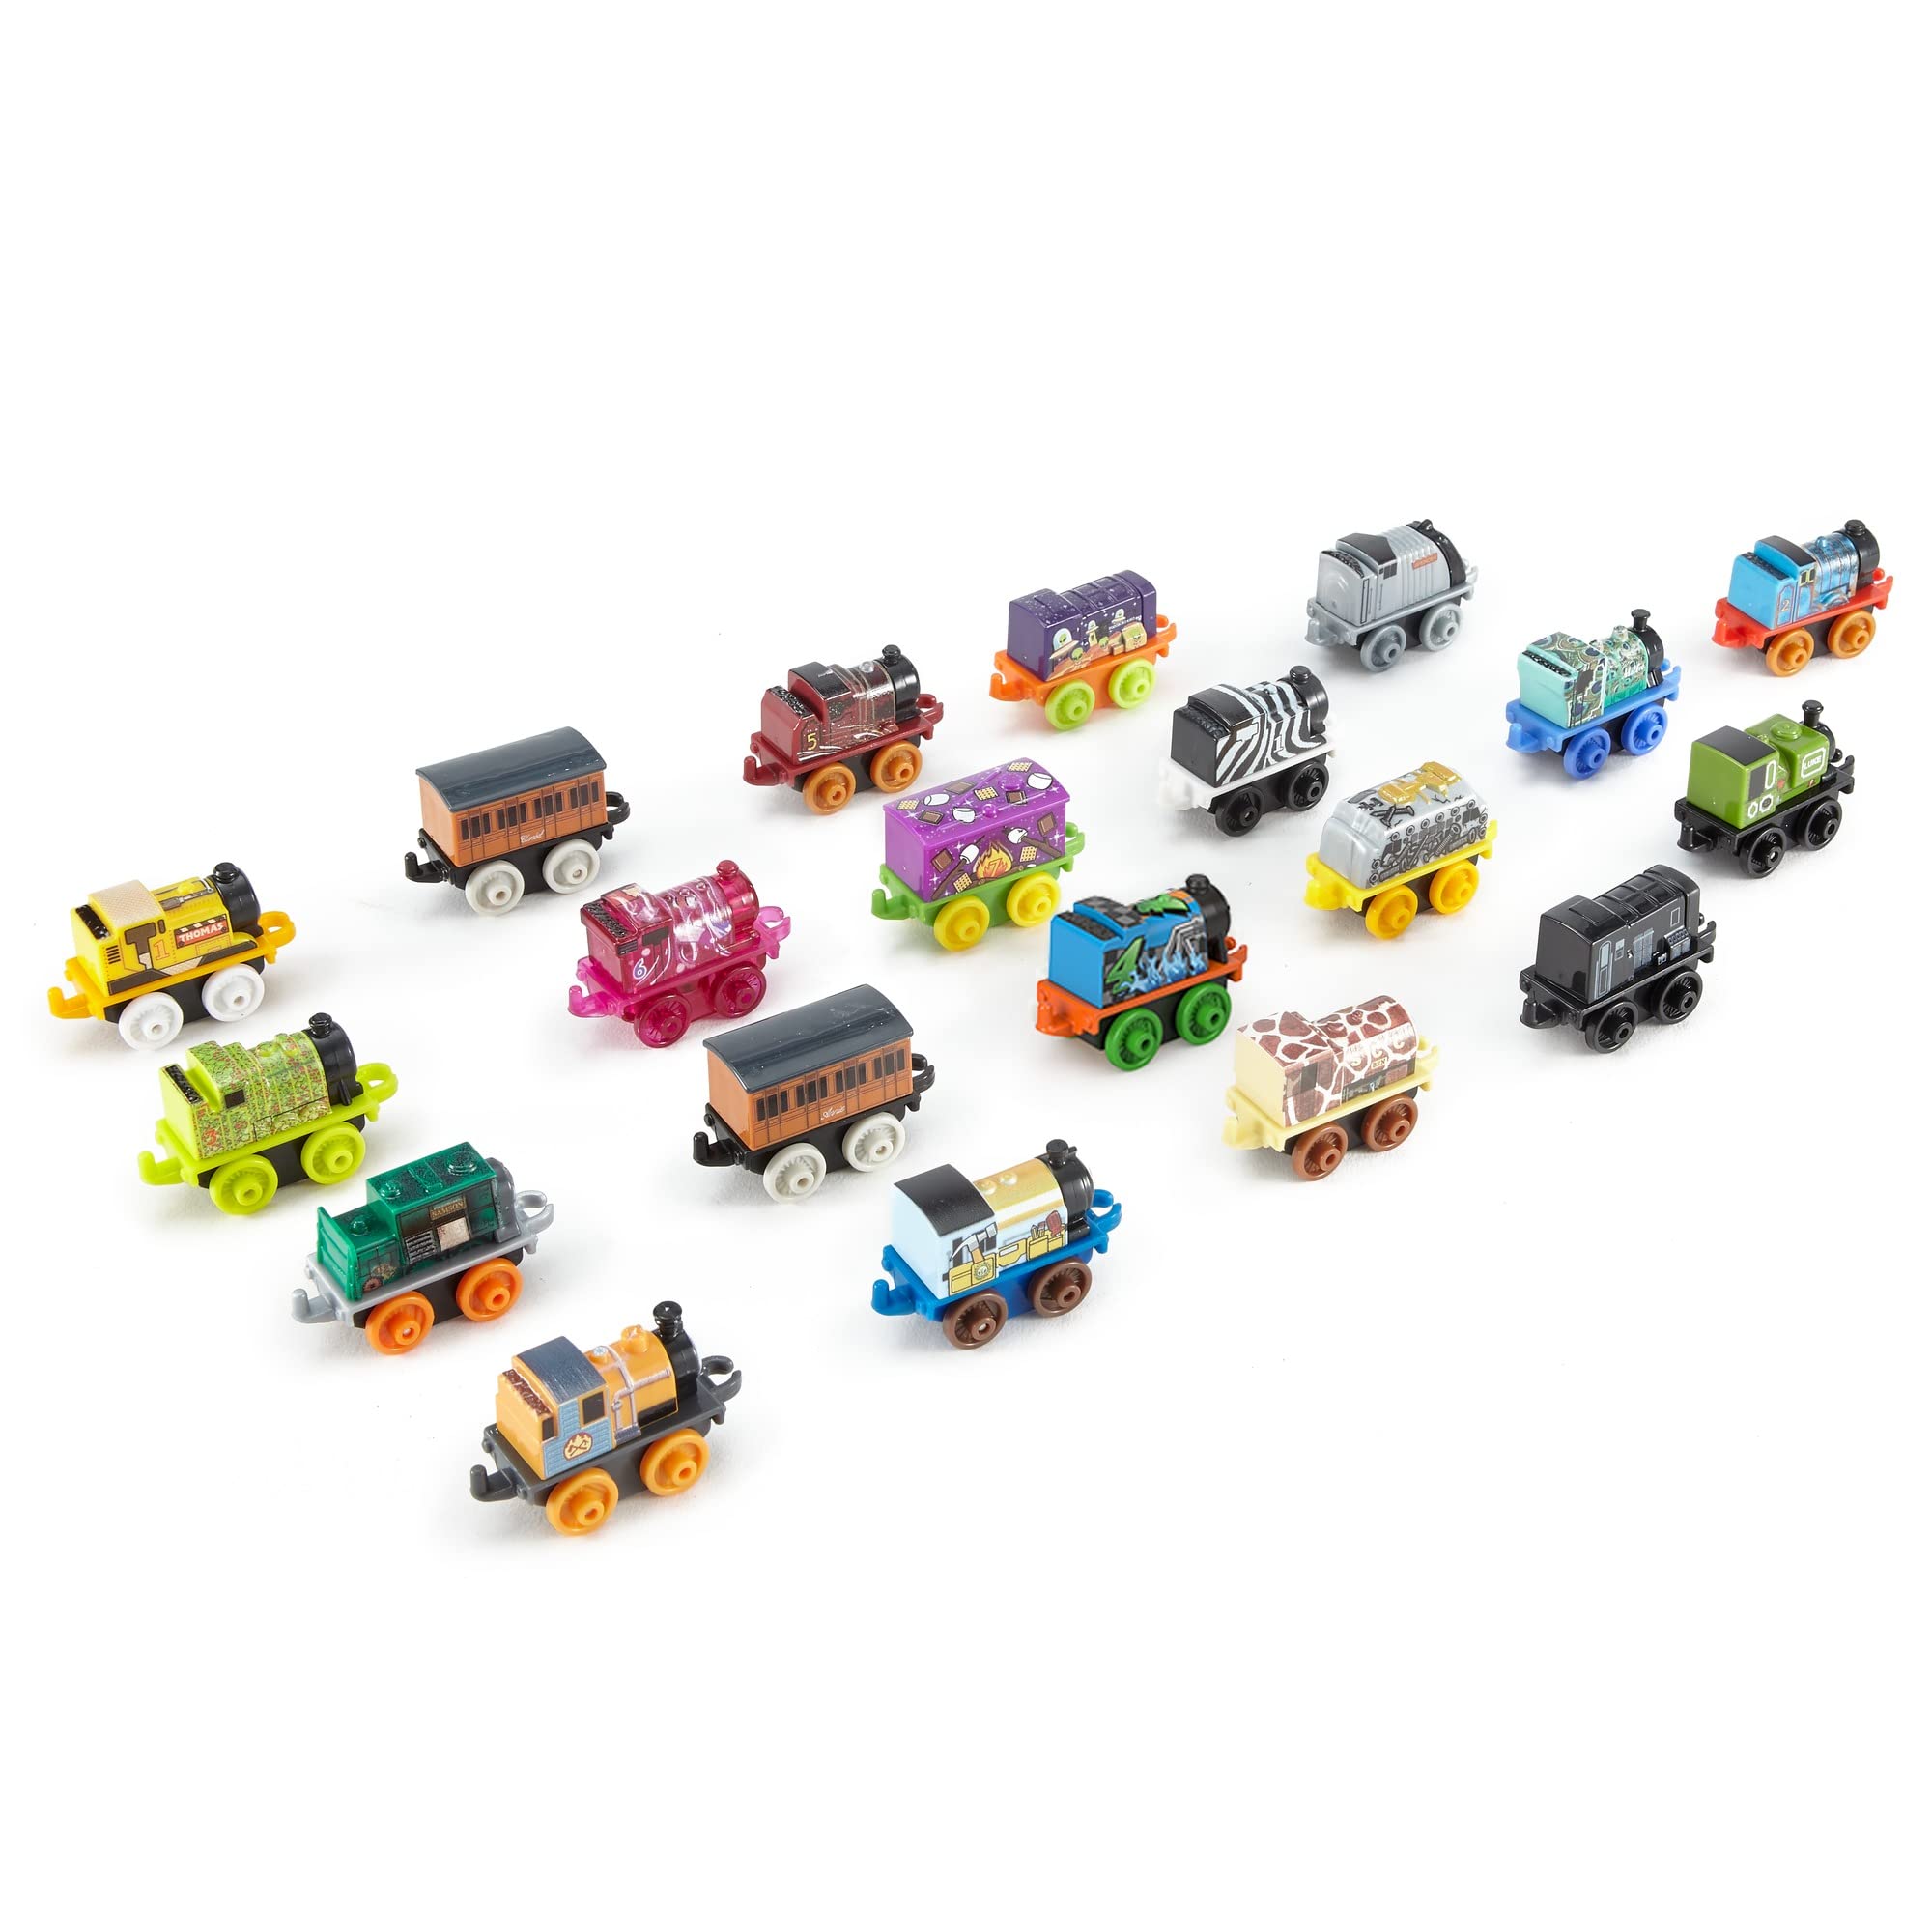 Thomas & Friends MINIS Toy Train 20 Pack for Kids Miniature Engines & Railway Vehicles for Preschool Pretend Play (Amazon Exclusive)